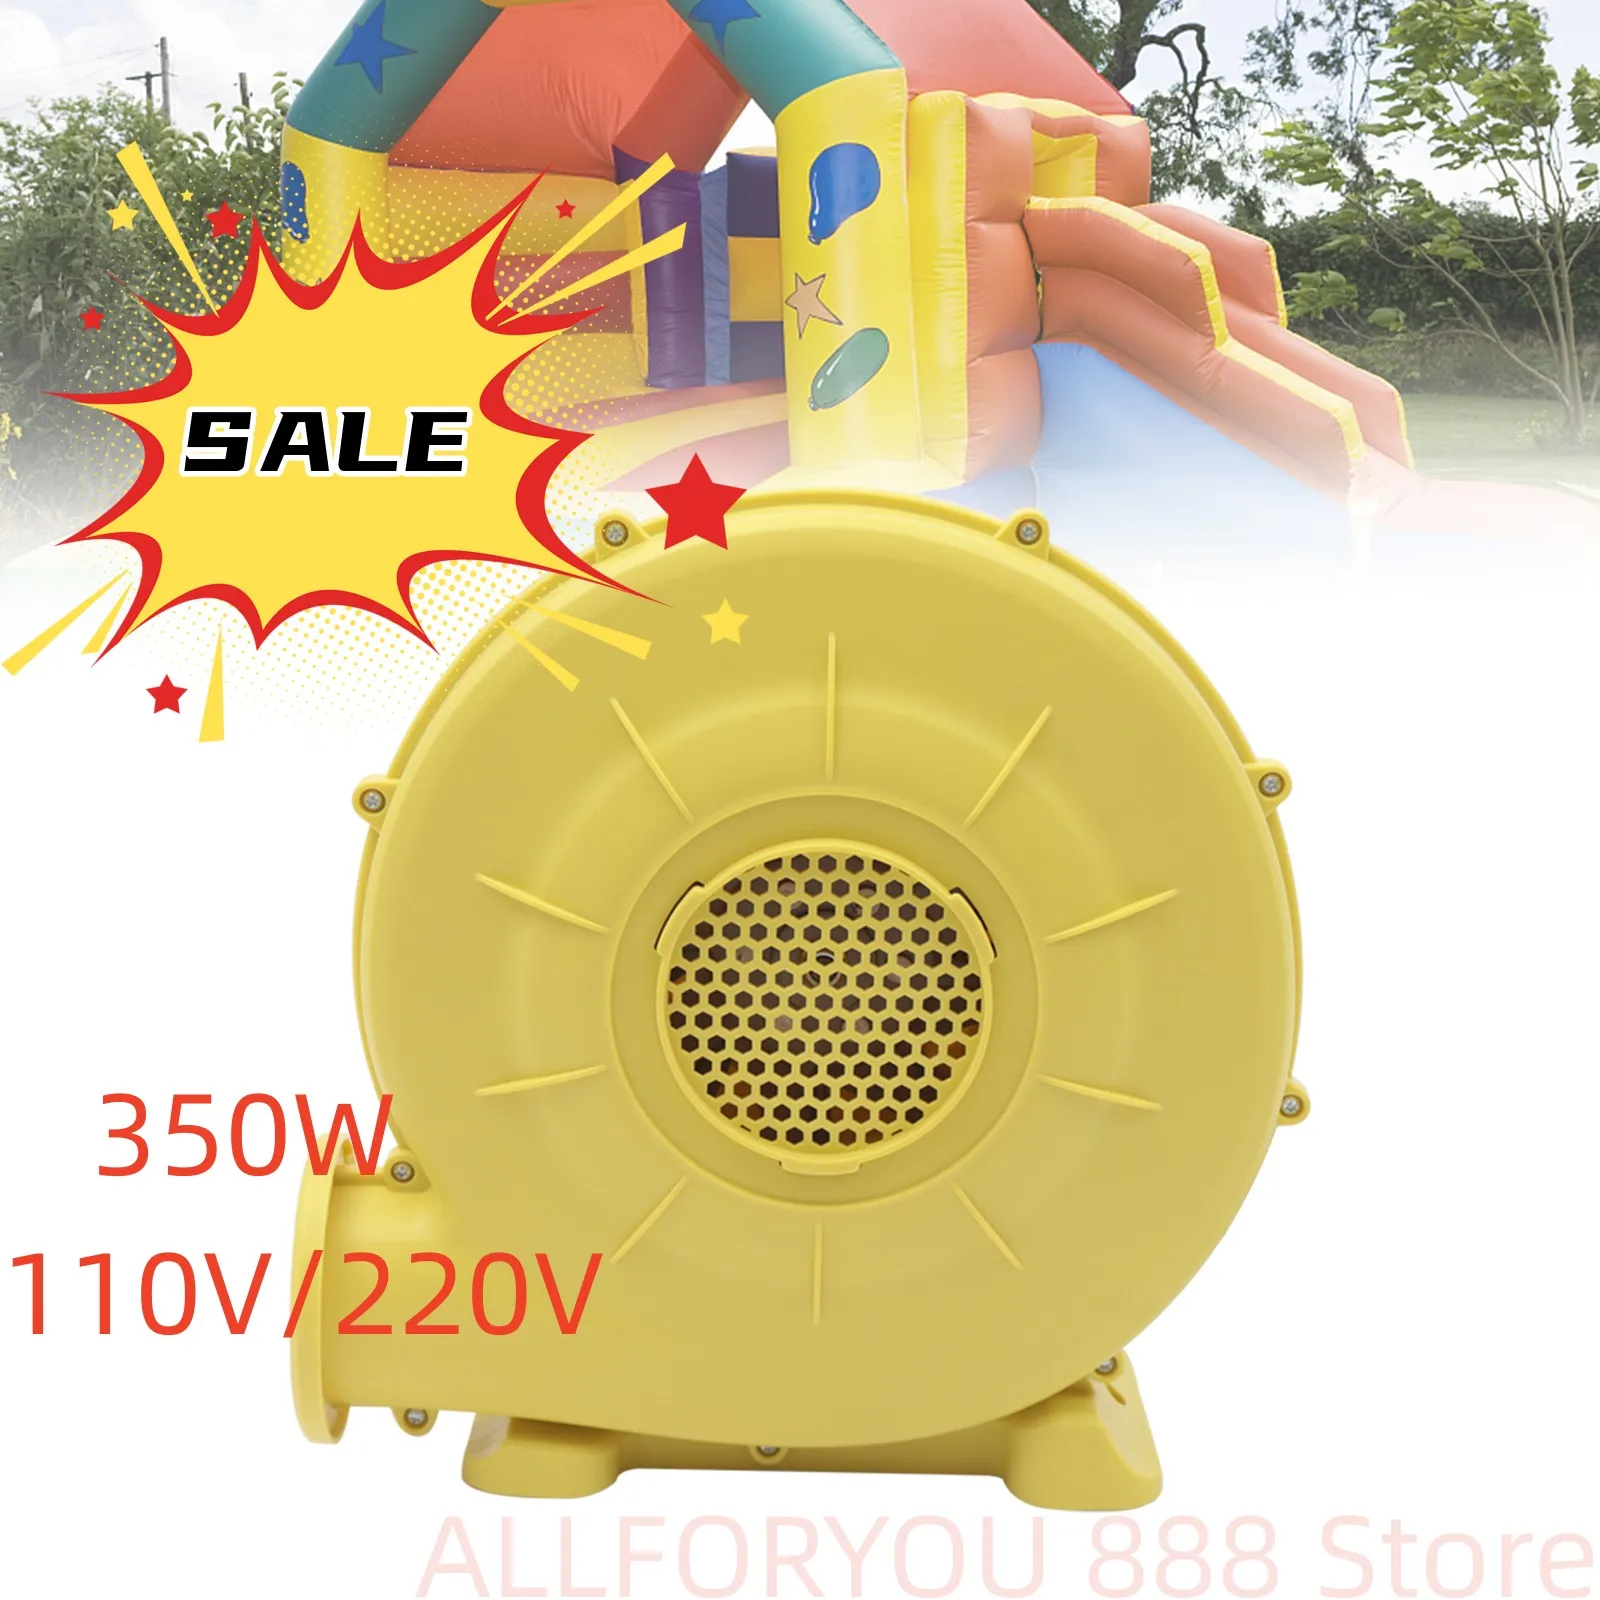 350W Air Blower Suitable For Outdoor Bounce Houses, Water slides, Obstacle Courses 110V/220V wide application silent basketball indoor and outdoor play safe pu pu made handleshh bounce